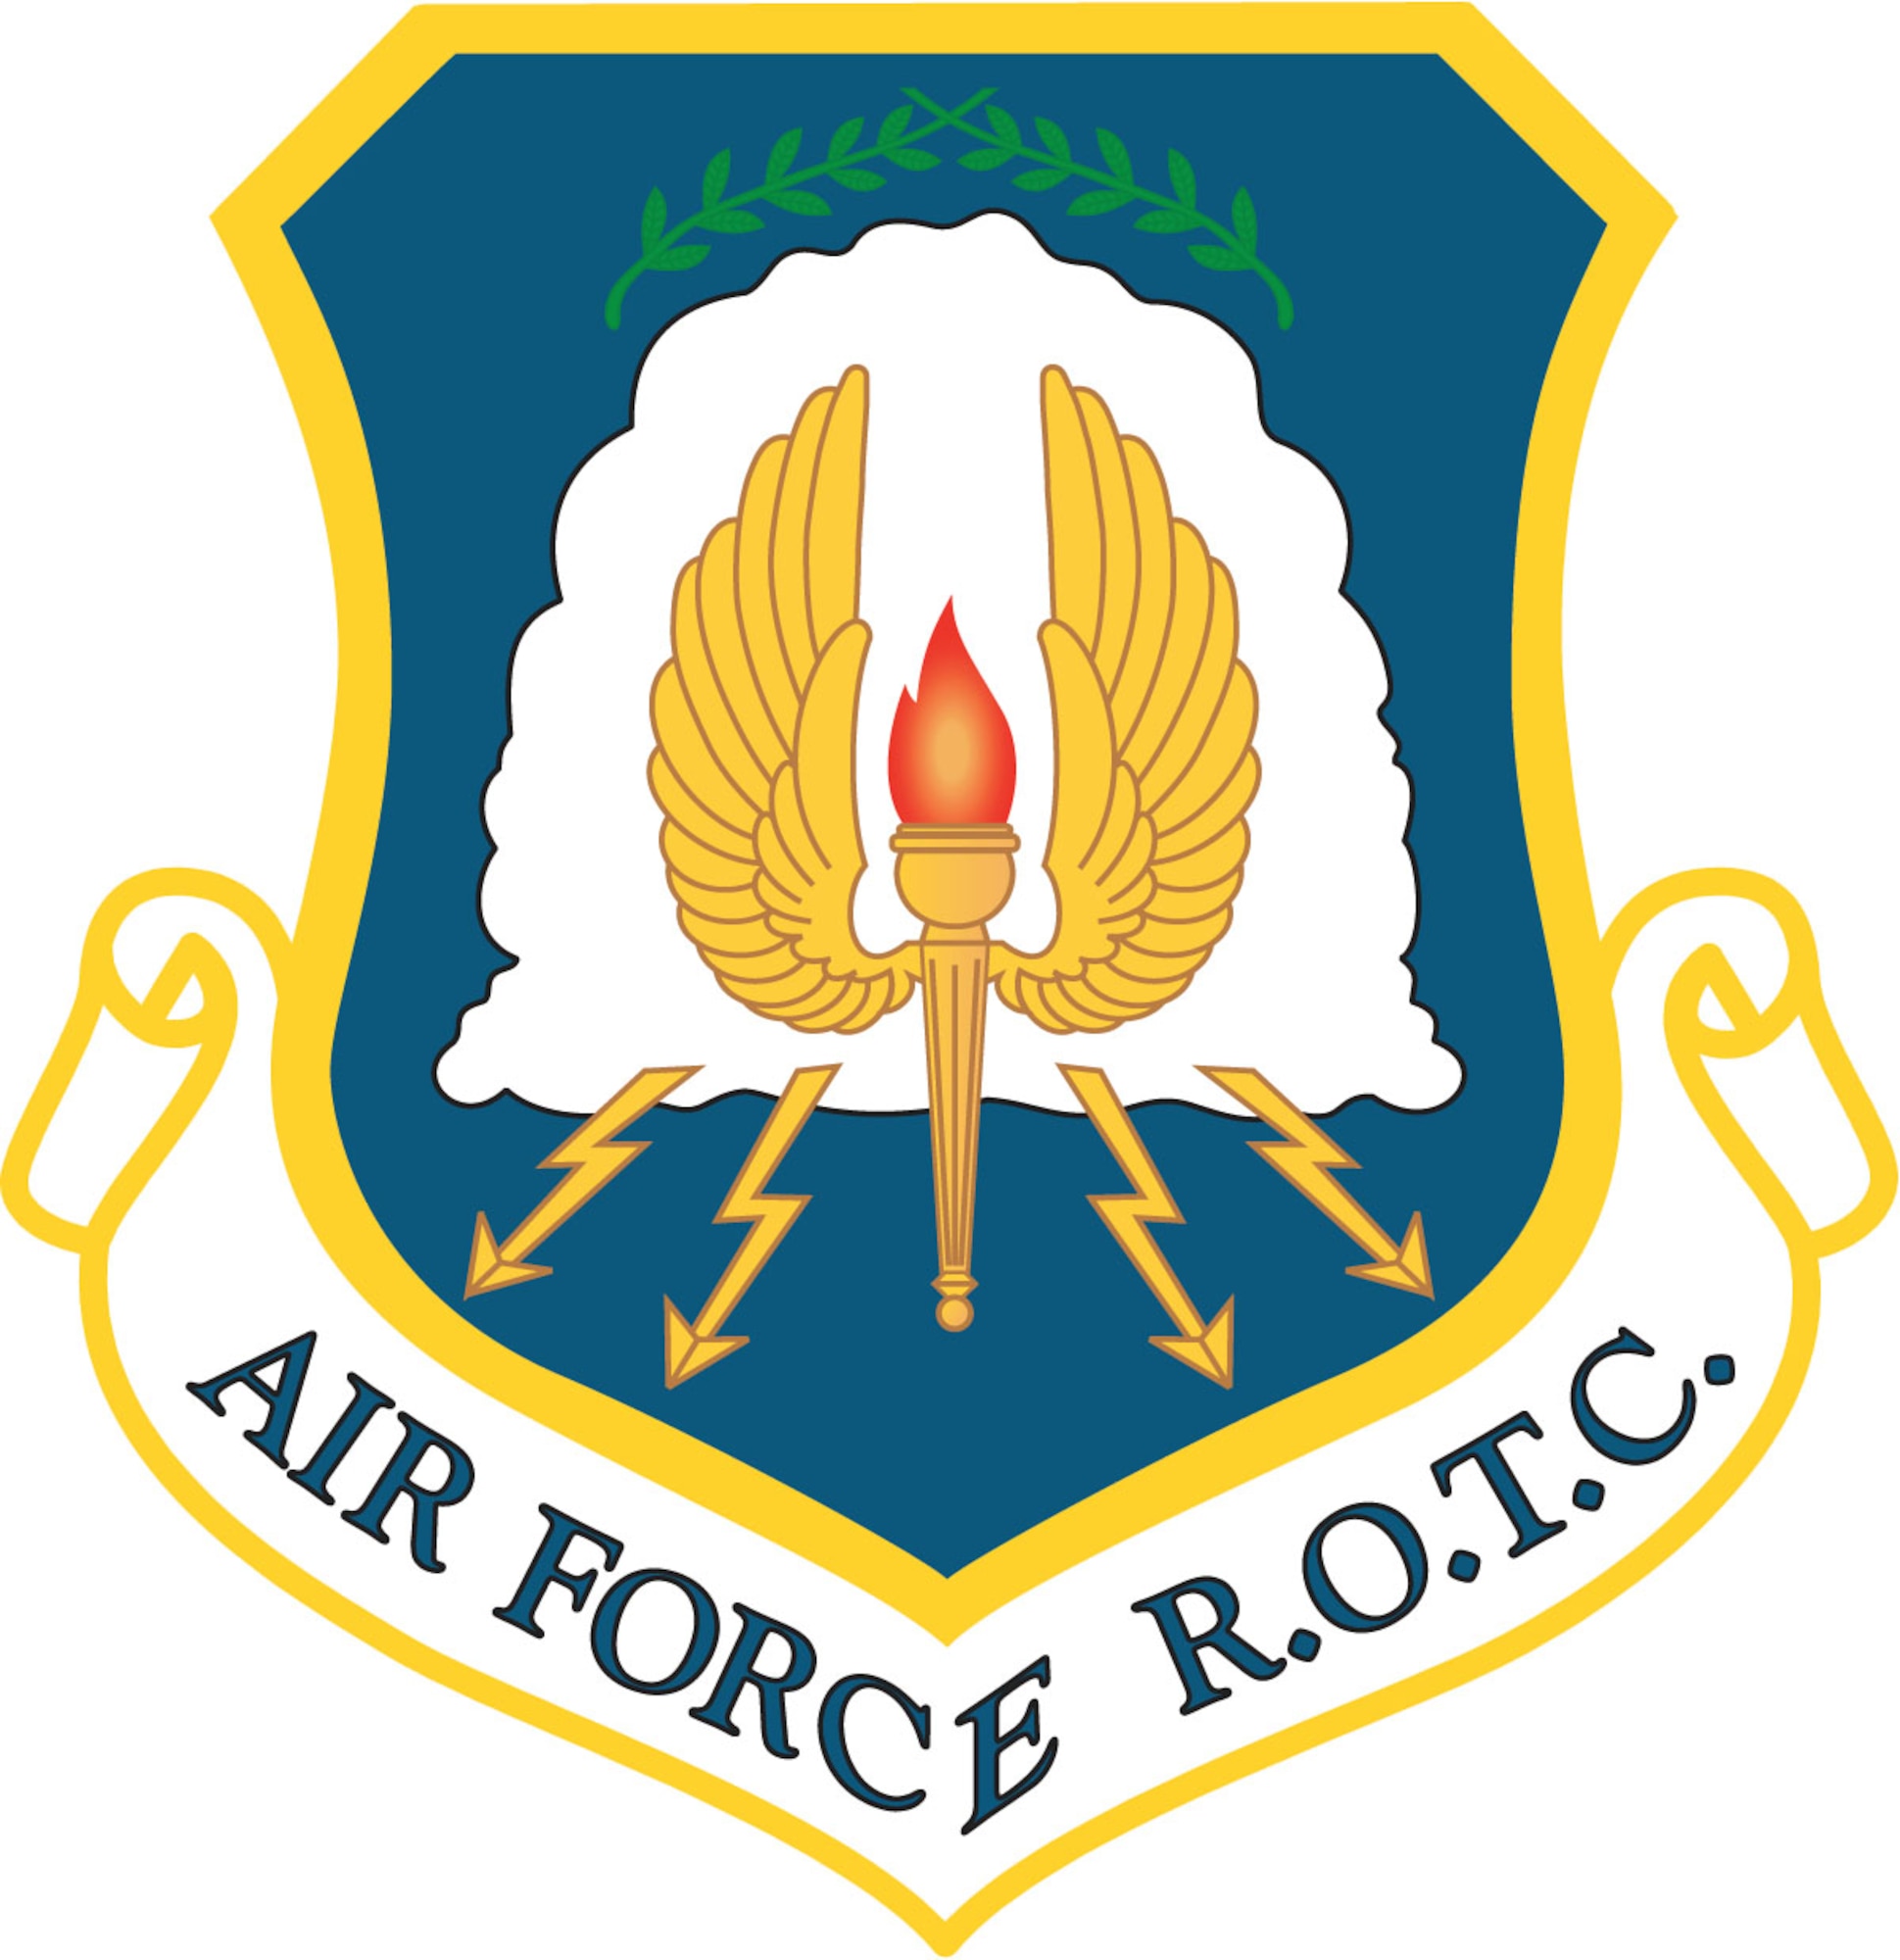 Air Force Reserve Officer Training Corps (AF ROTC) shield (clr), Contributed by Morris Foston II 